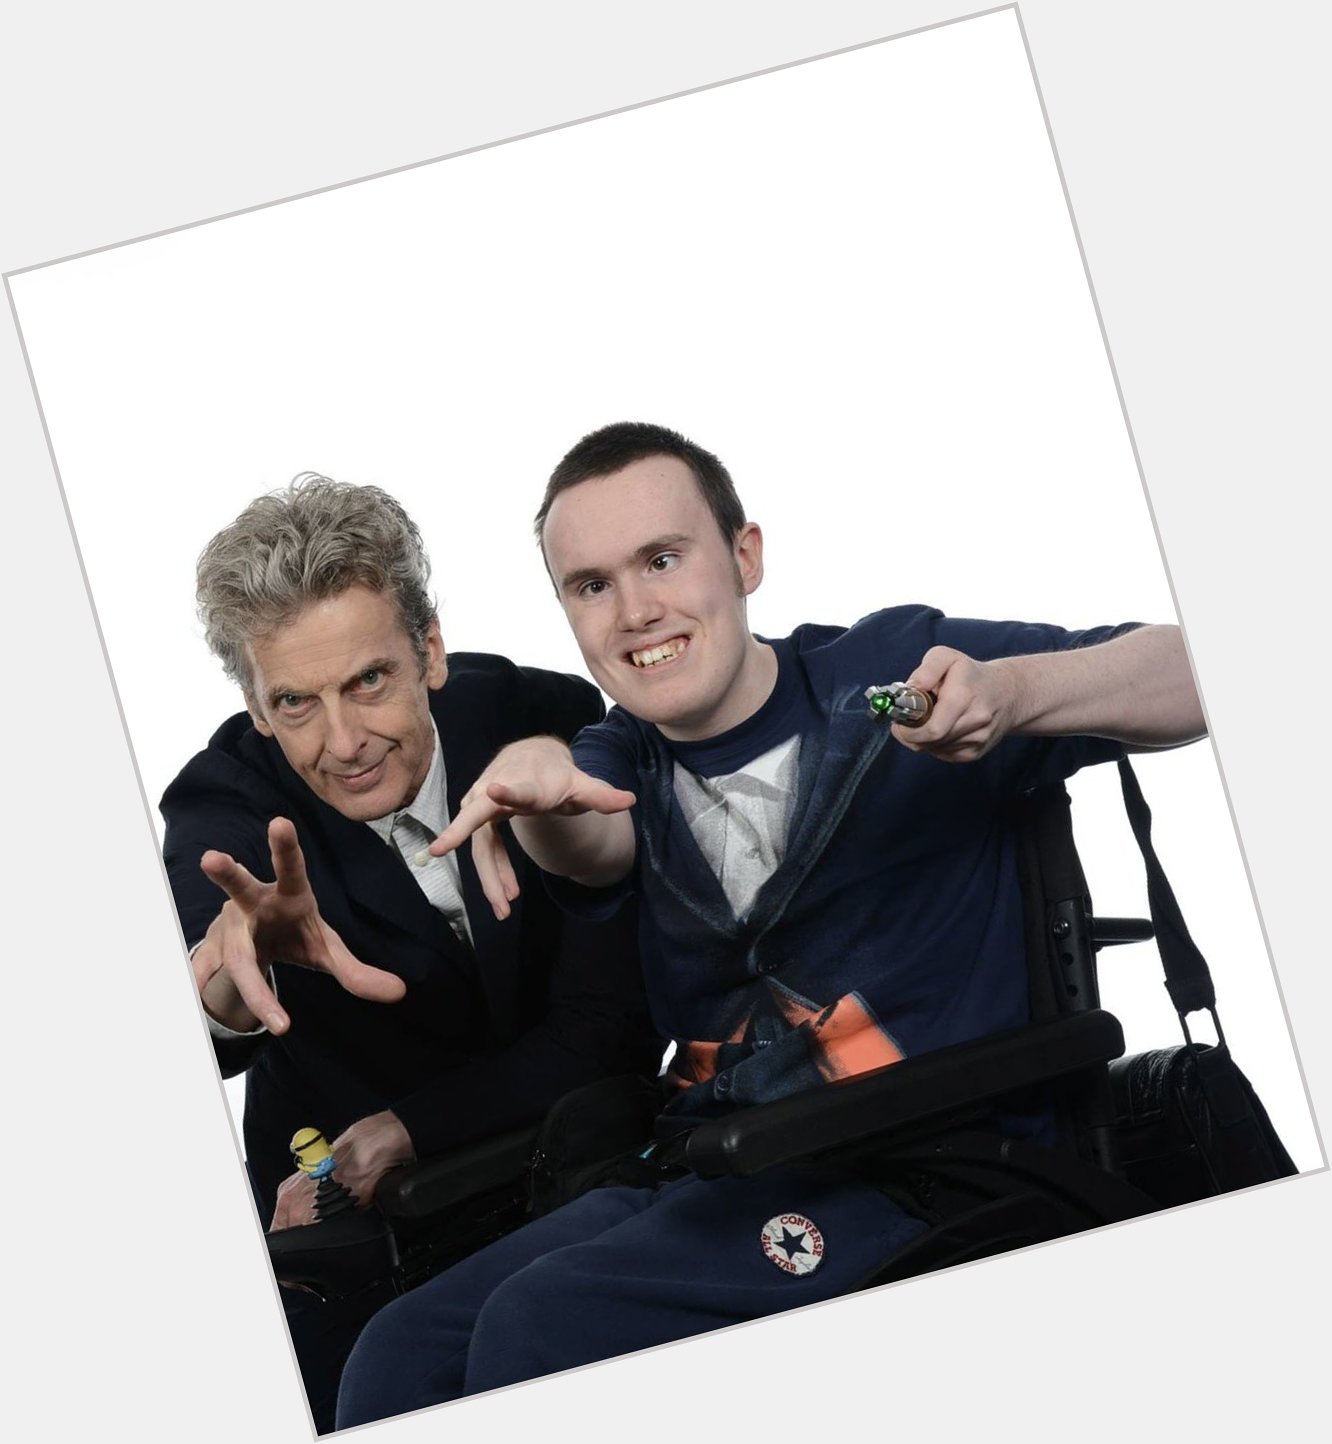 Happy Birthday to one of the best Doctors of all time, Peter Capaldi!       